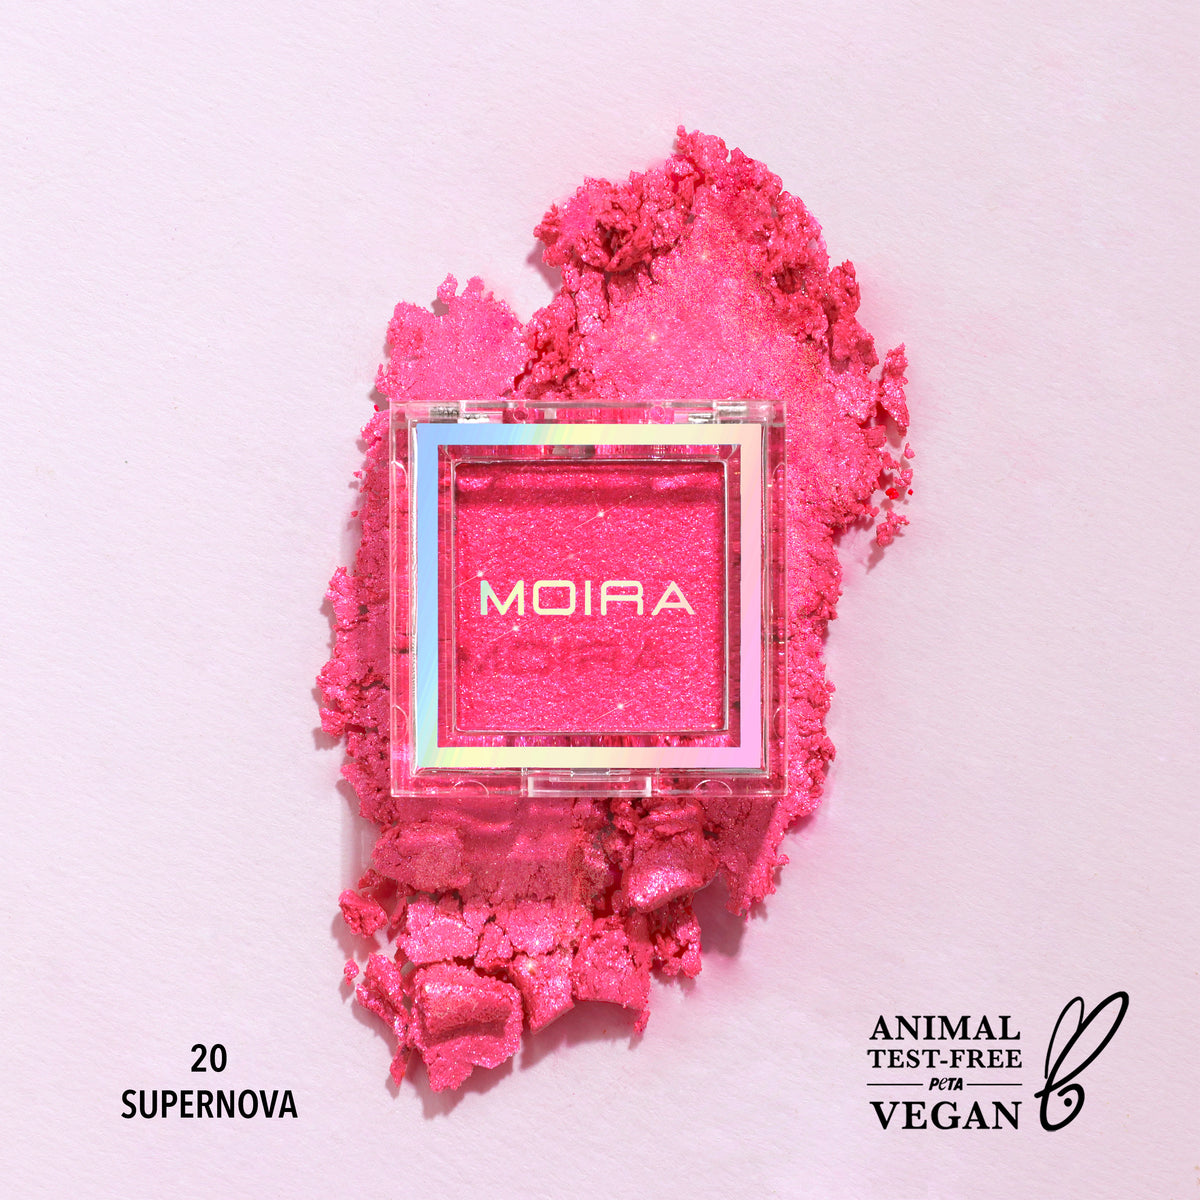 Moira Cosmetics - Sparkle this summer with our Lucent Cream Shadow